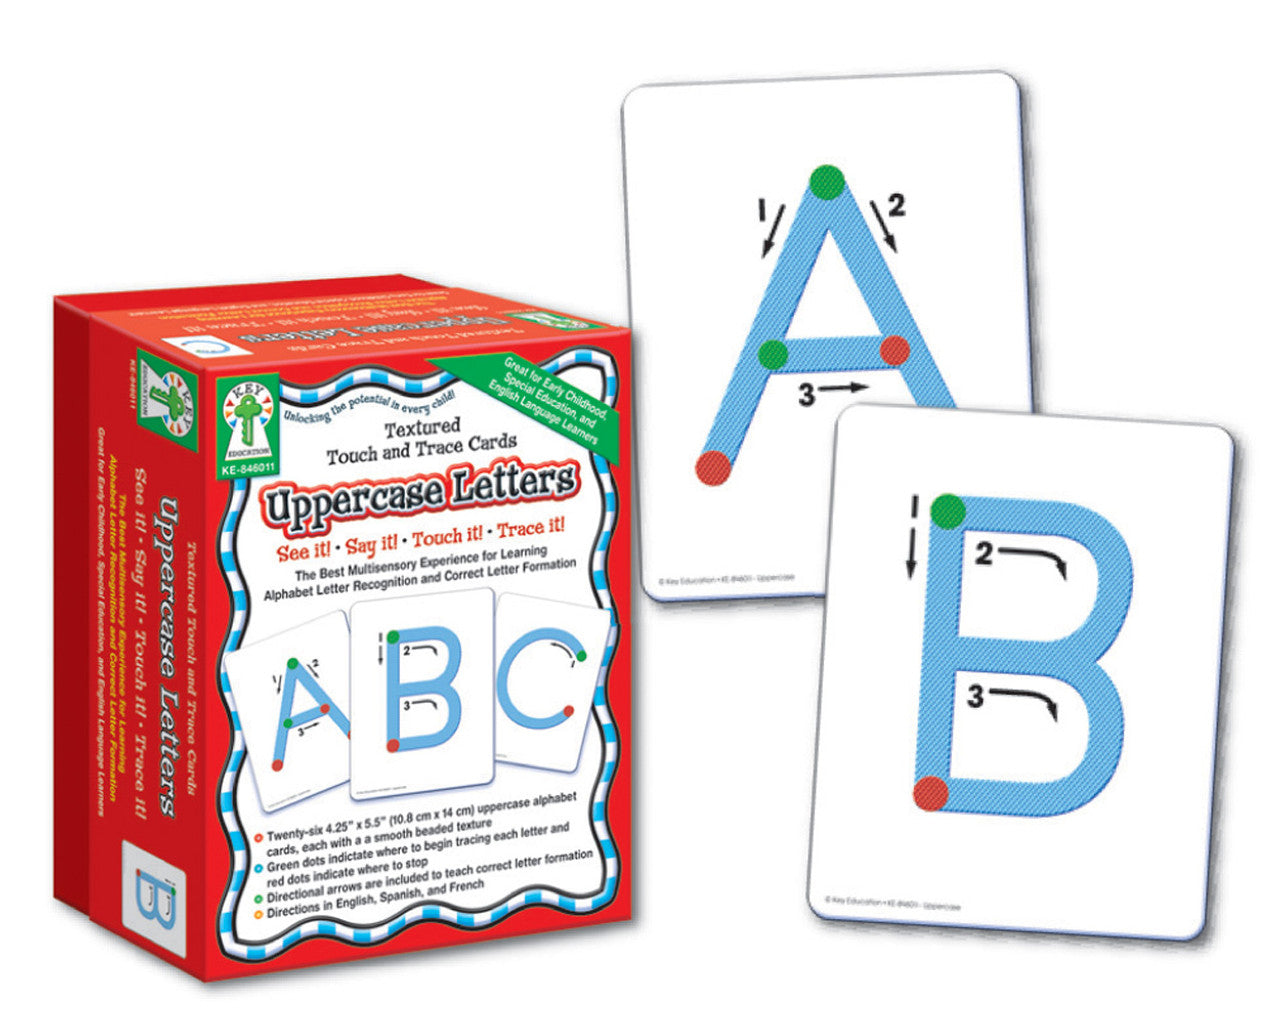 Uppercase Letters Textured Touch and Trace Cards